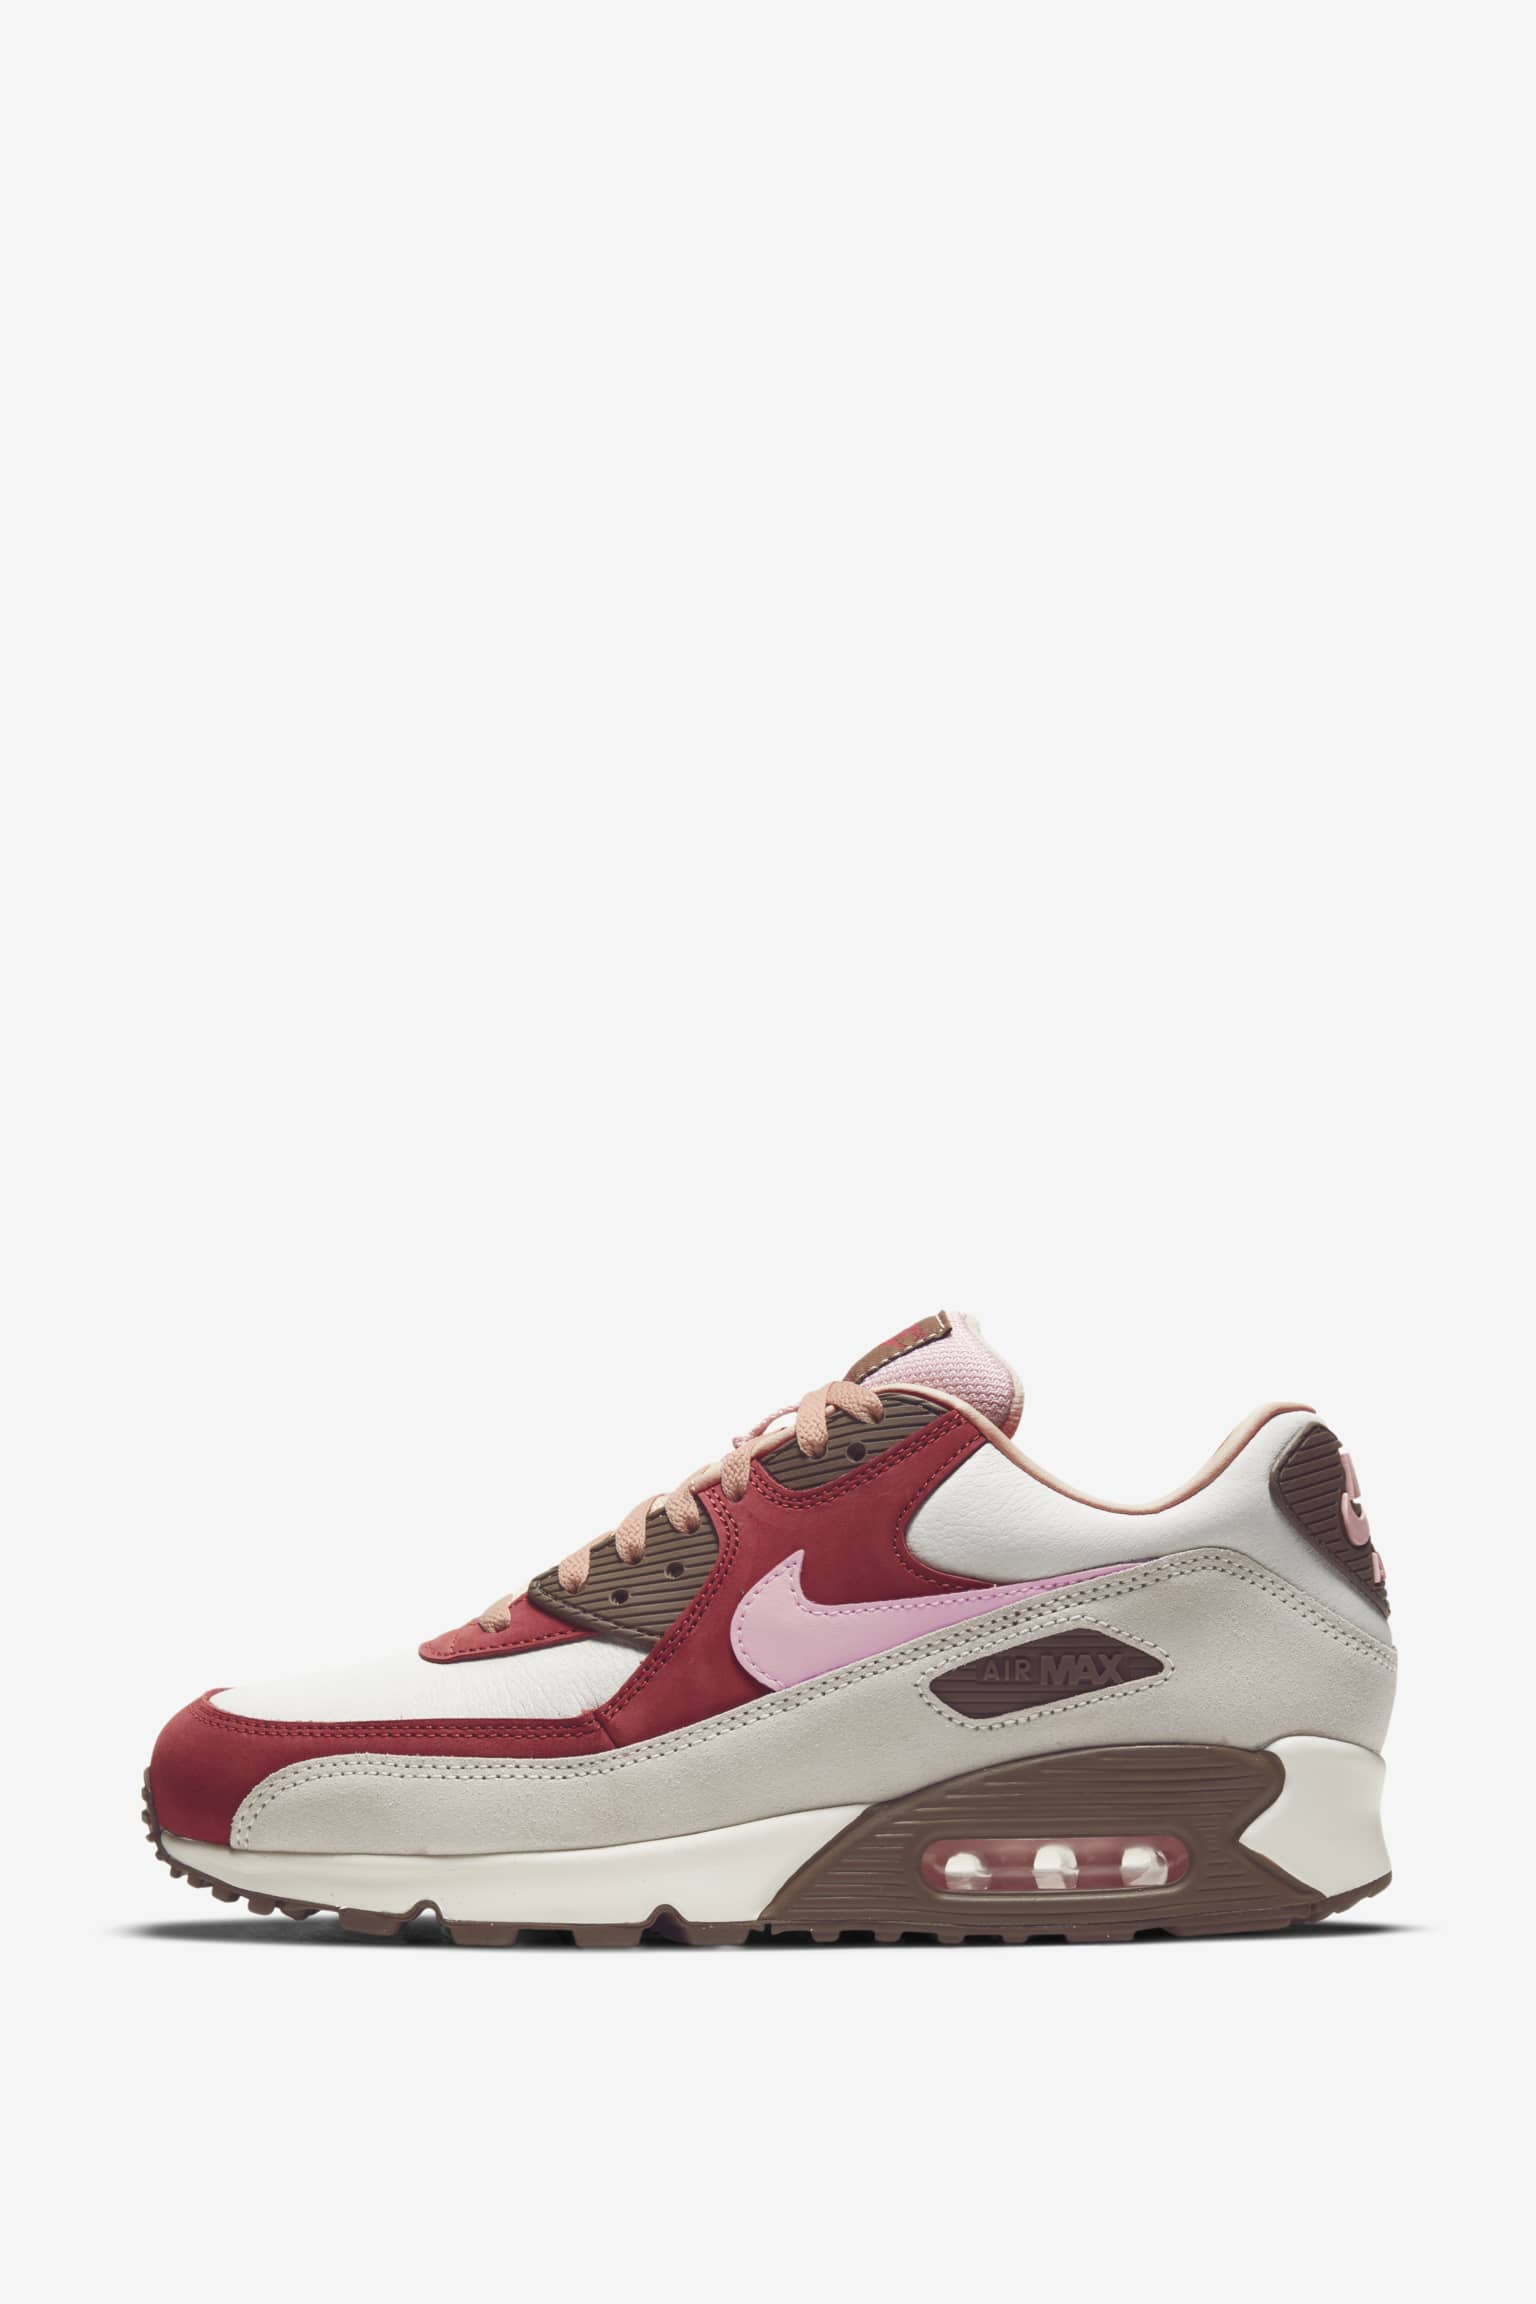 nike snkrs indonesia